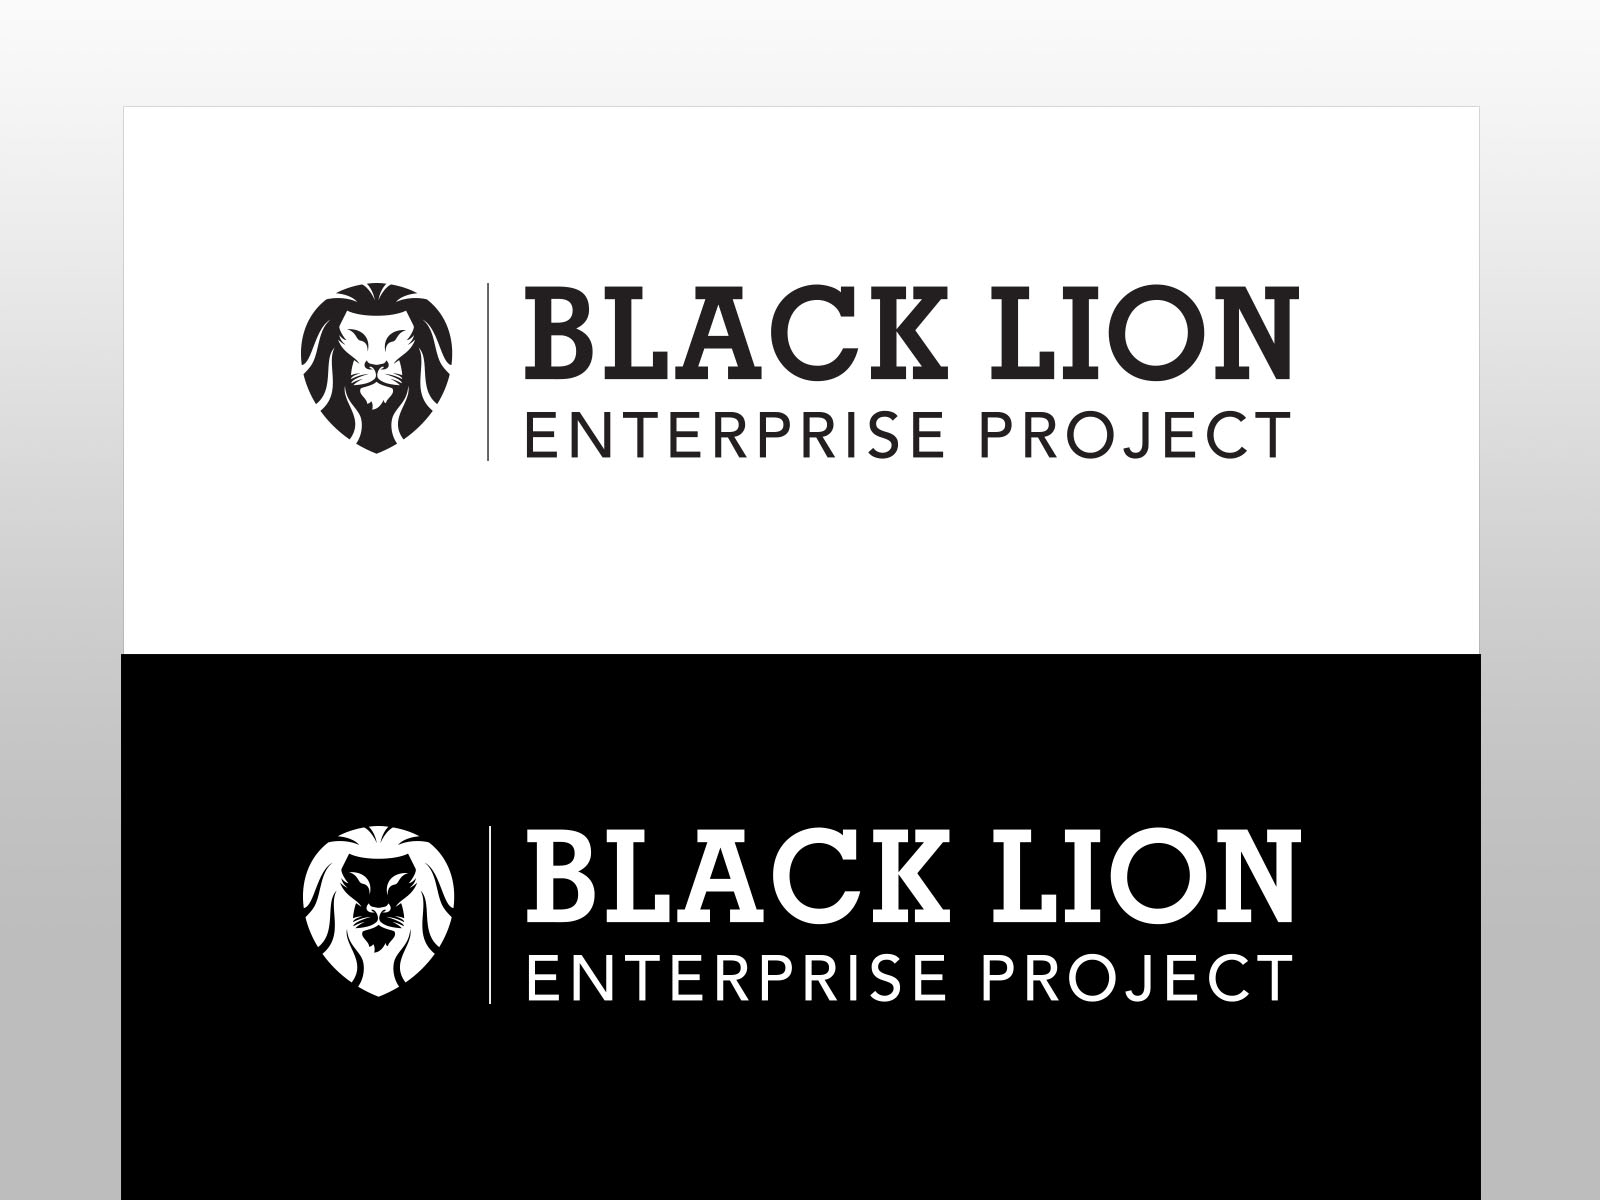 Black And White Line Art And Blue Lion Face Front View Vector Art Image Logo  Template Lion Head Sticker And Tattoo Design Stock Illustration - Download  Image Now - iStock